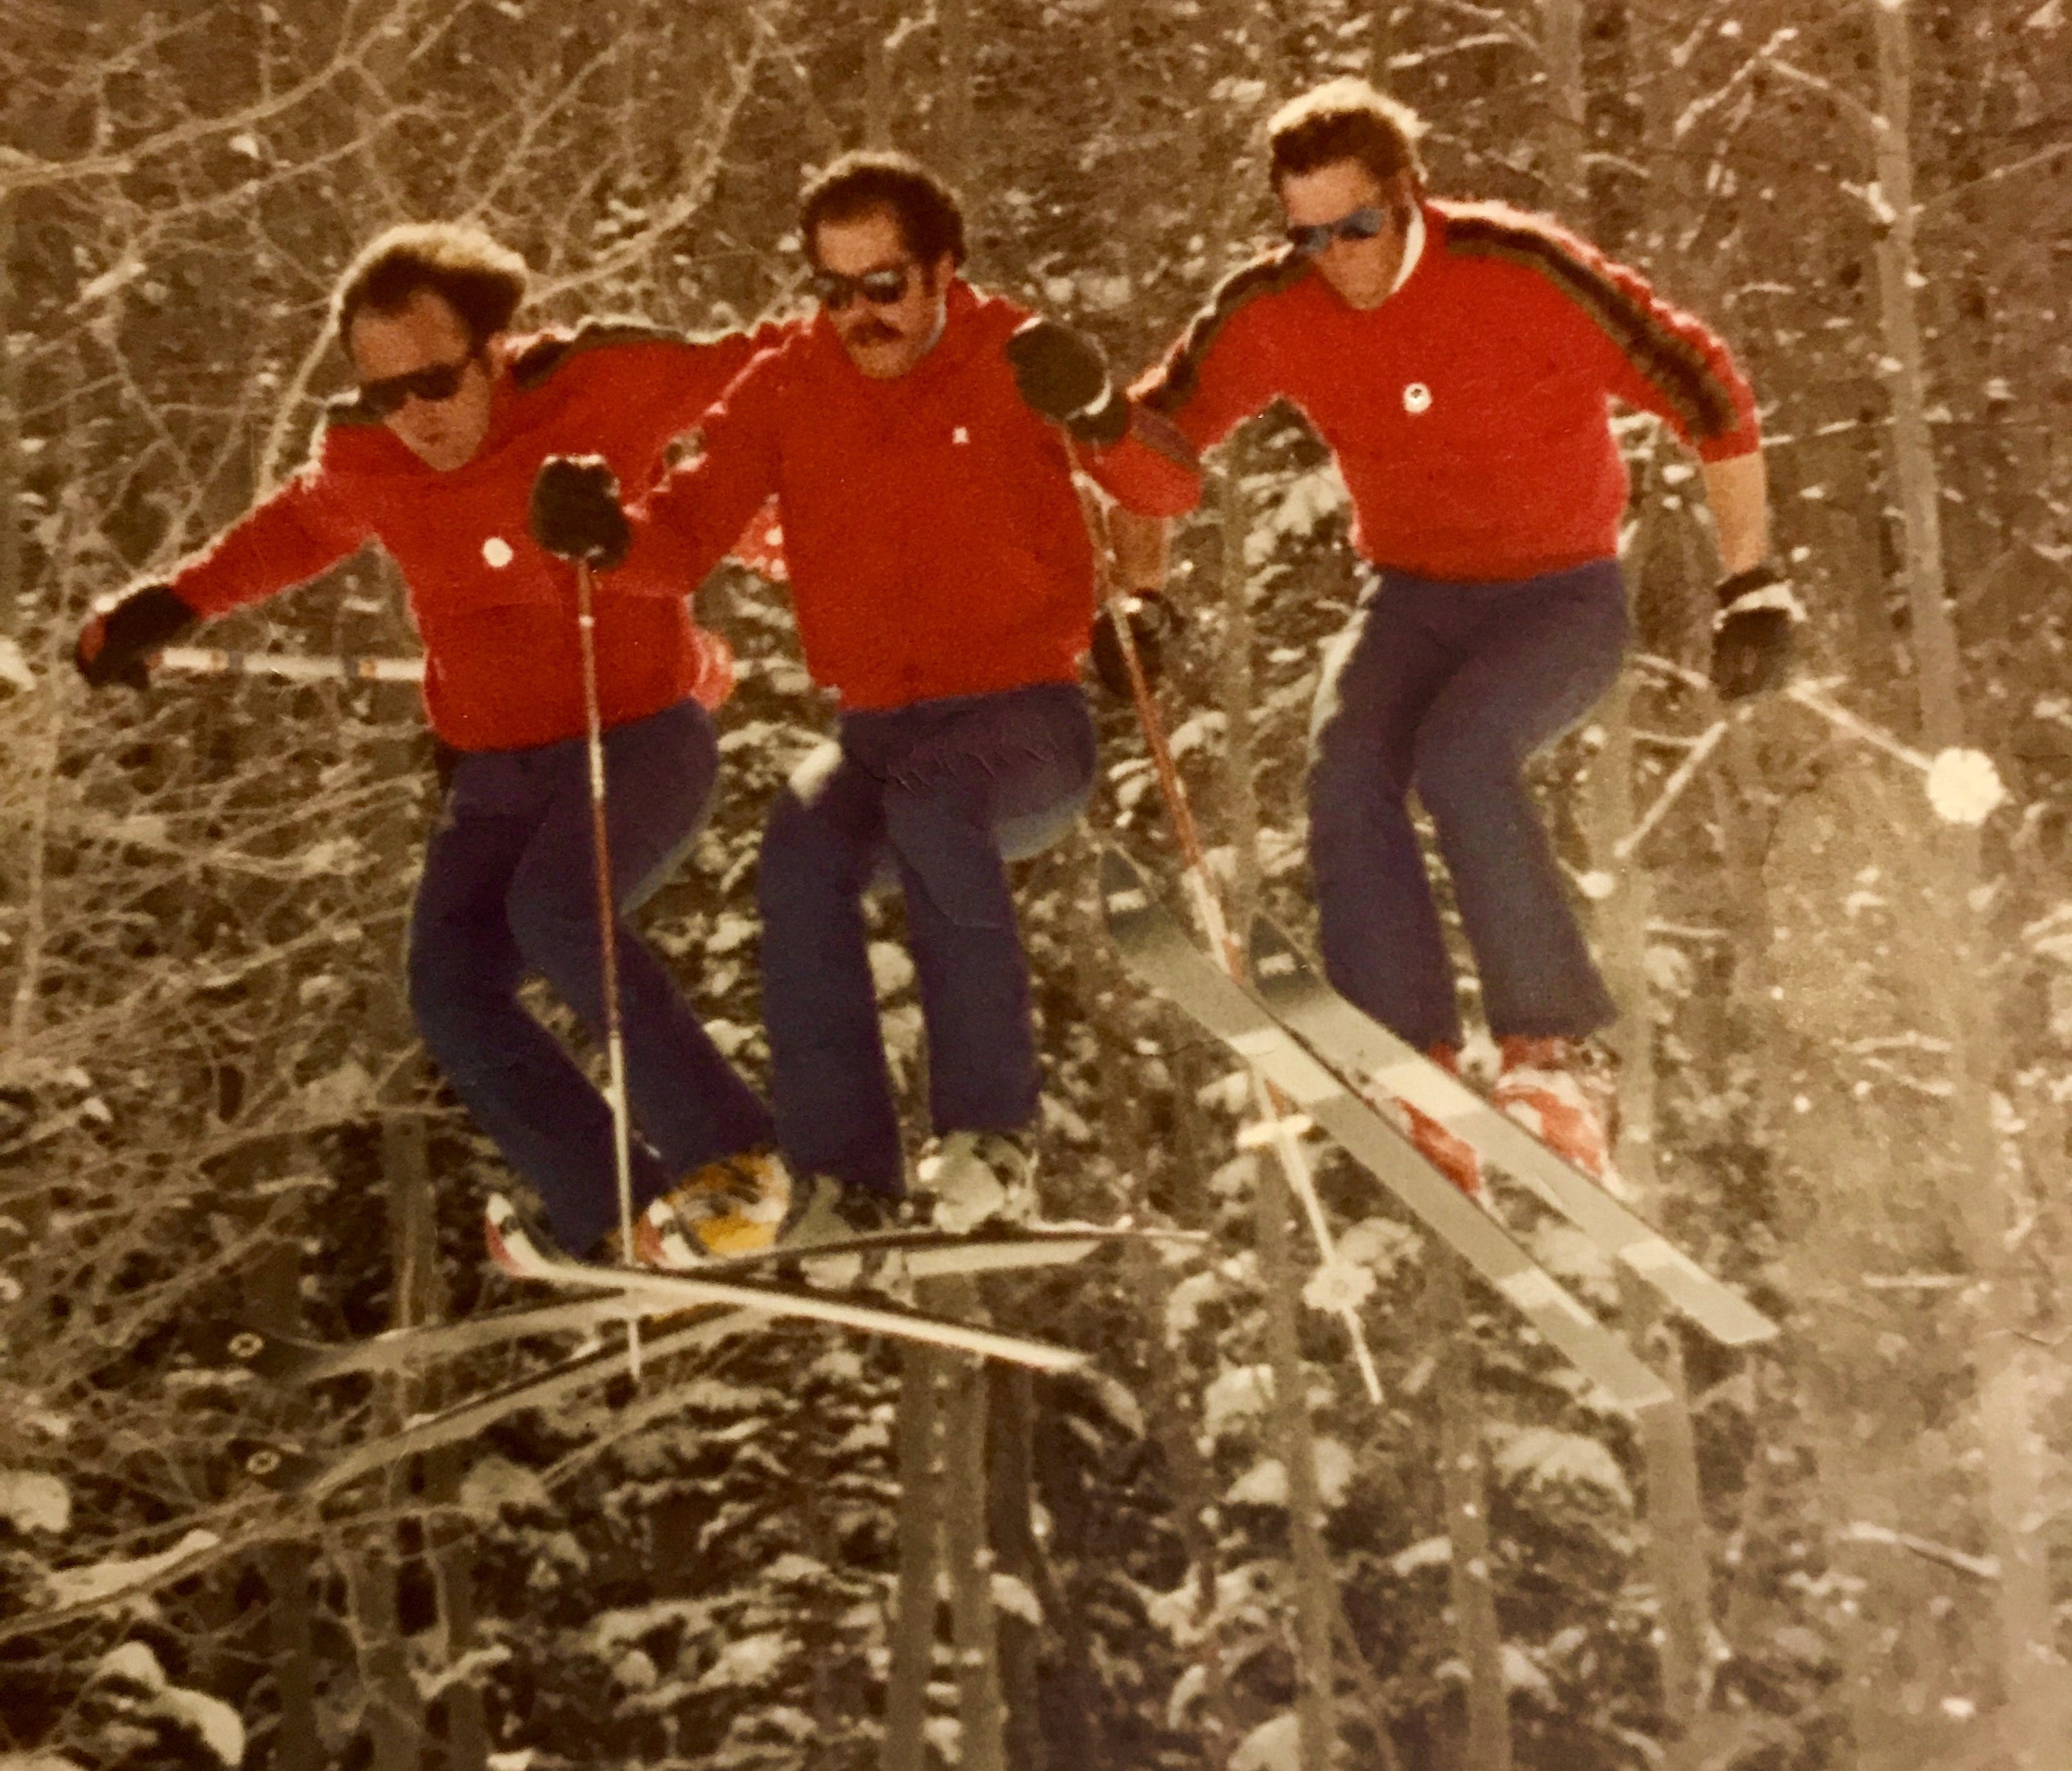 Vintage shot from Snowmass.